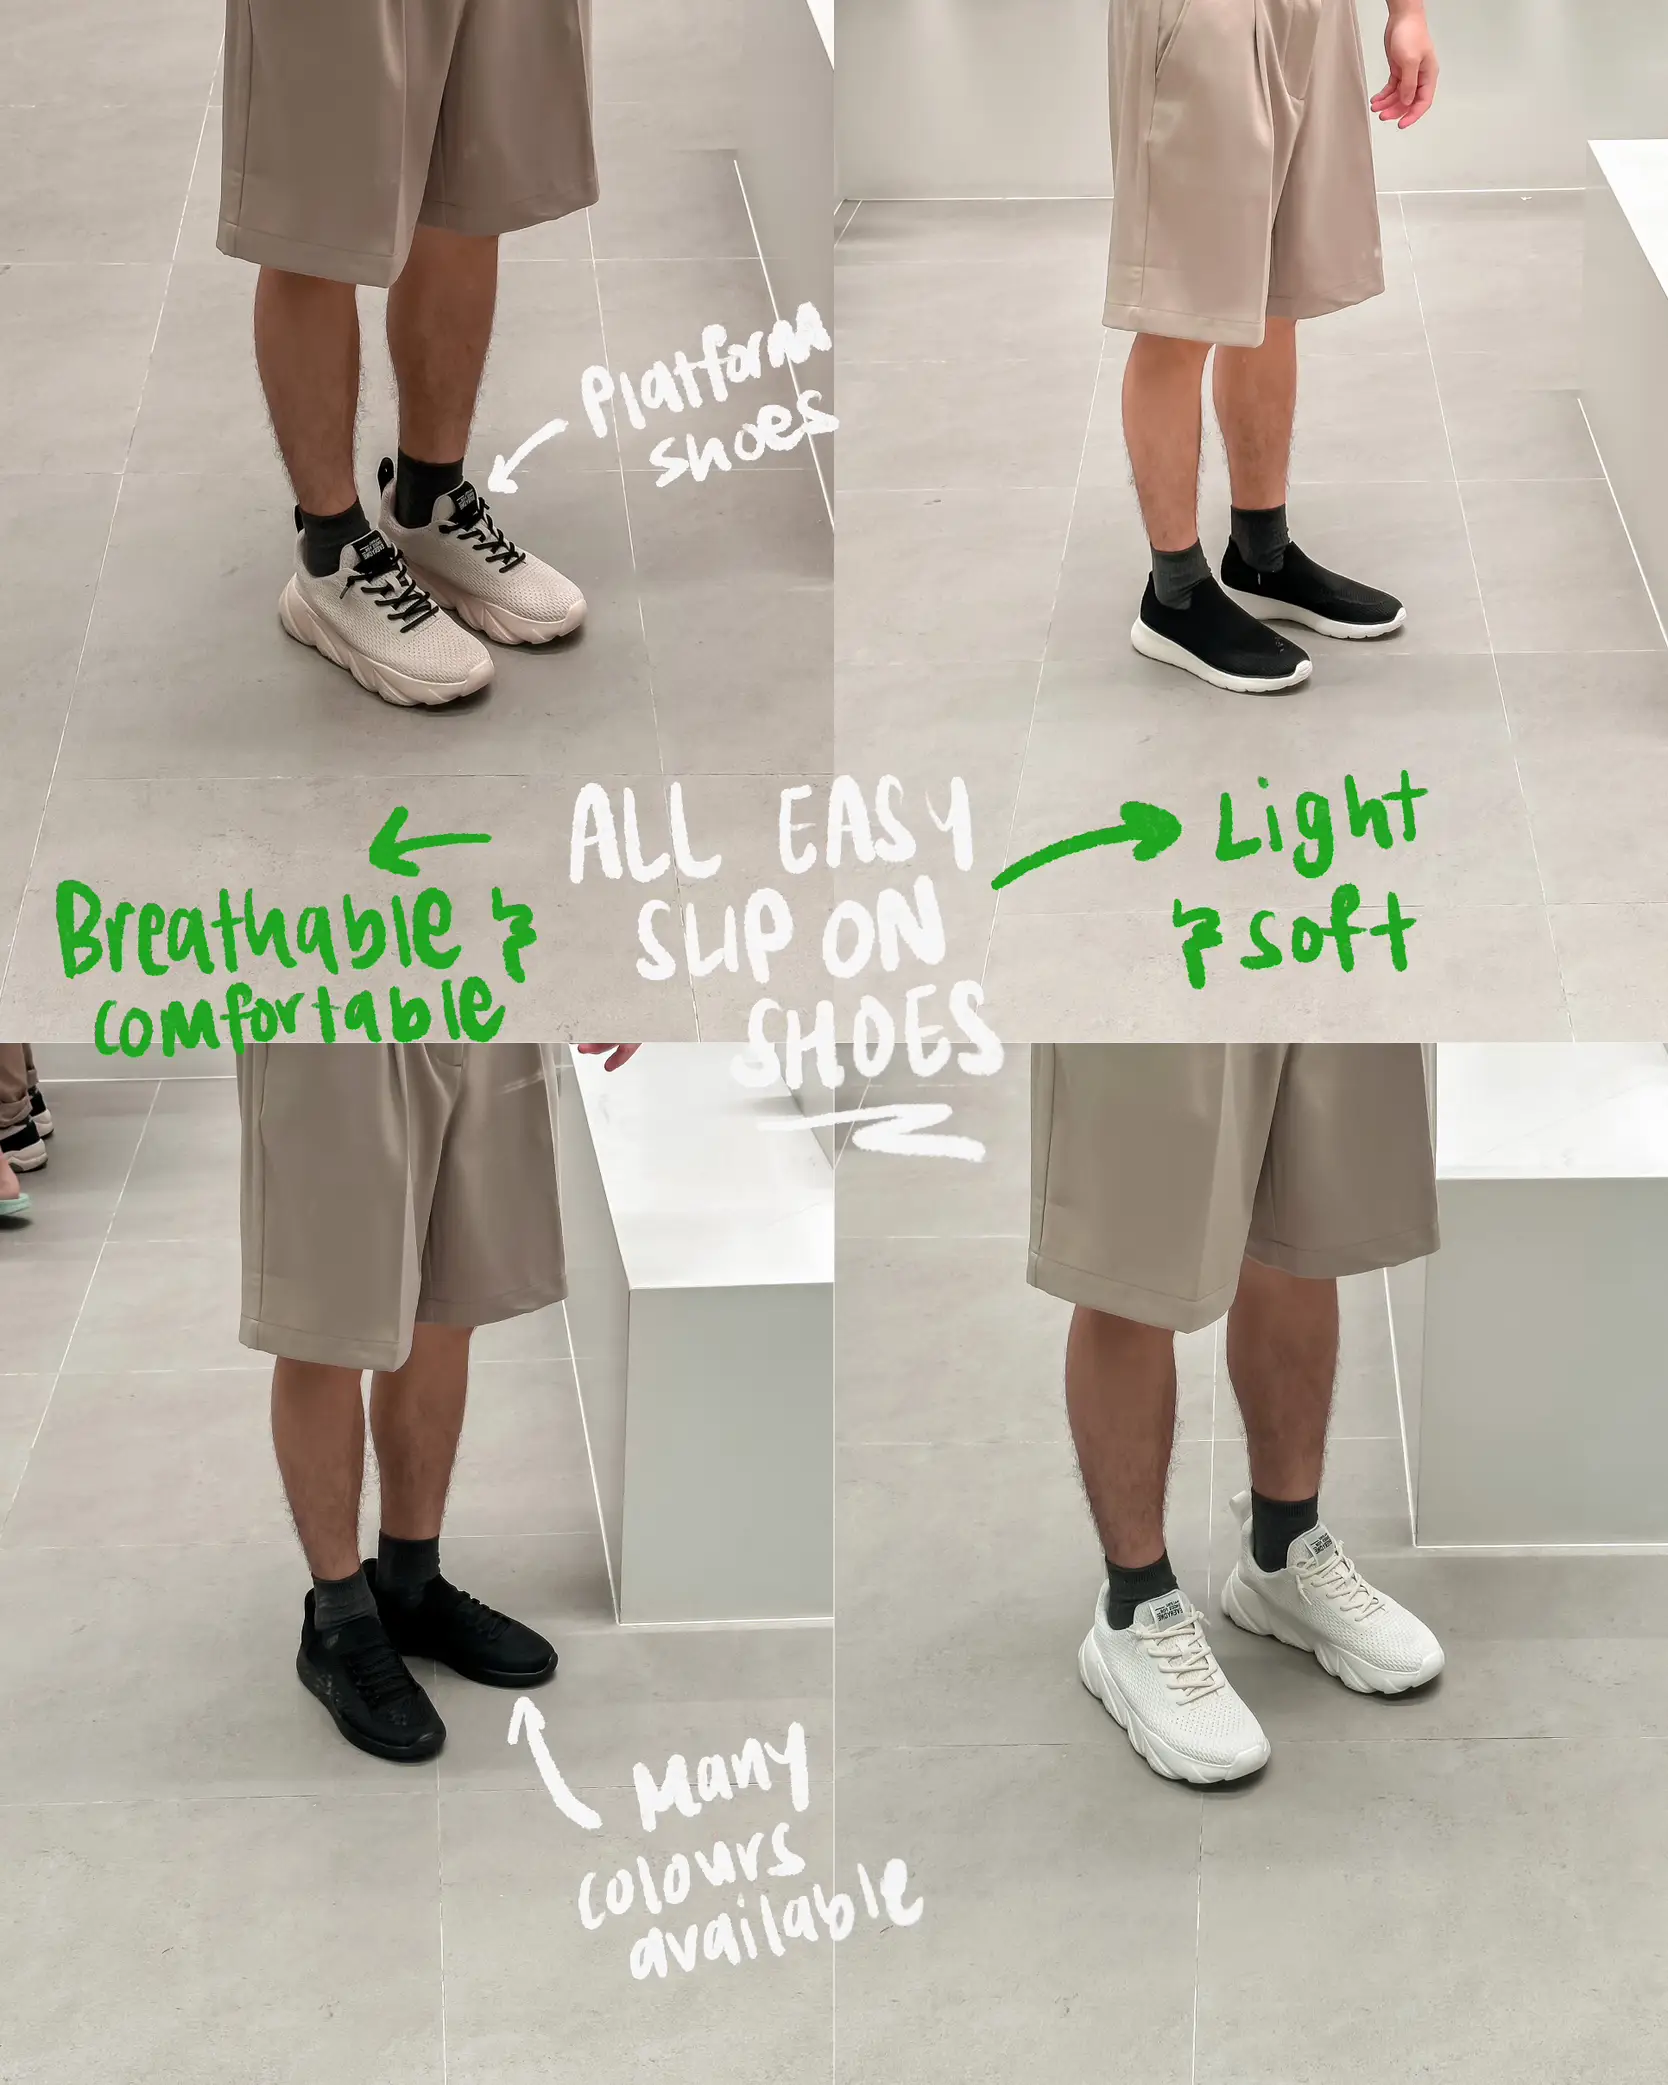 <NEW> Lightweight and comfy shoes UNDER $80 SGD 👟🏃🏻‍♂️'s images(1)